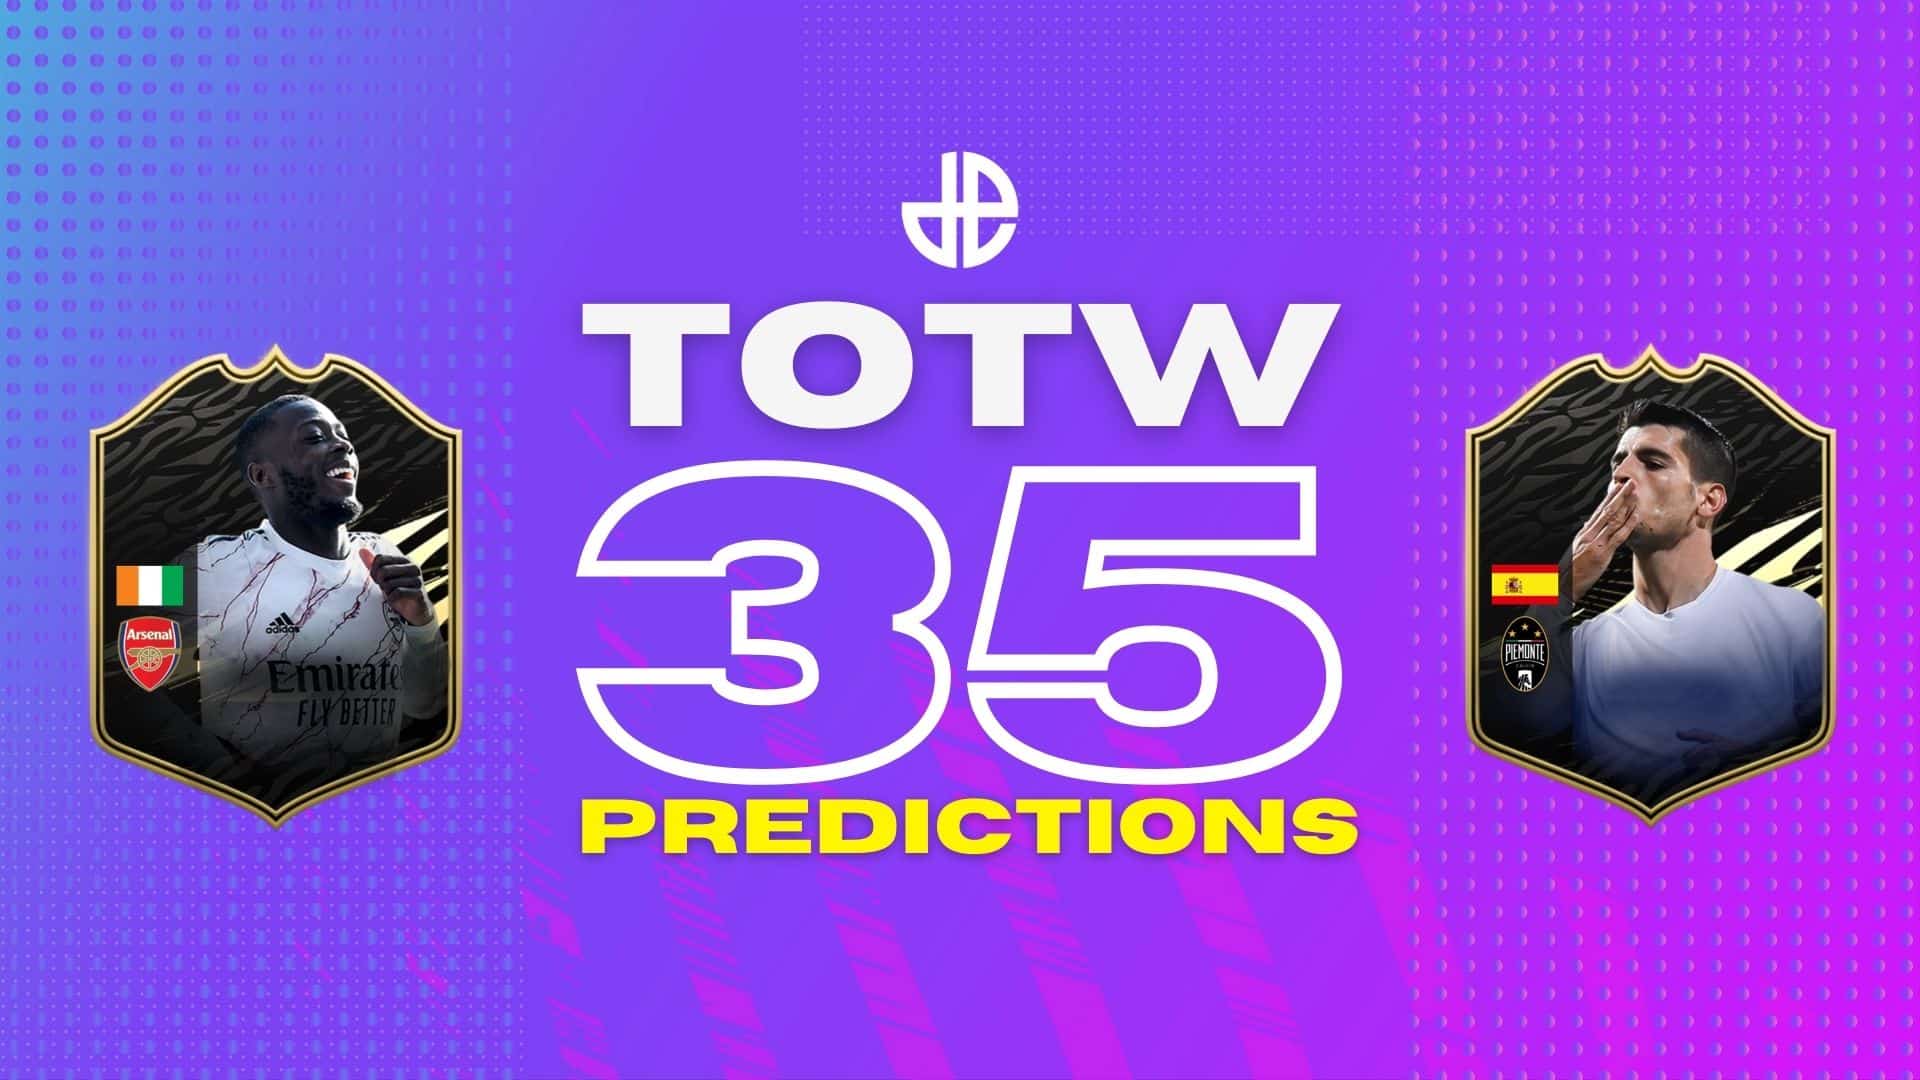 FIFA 21 TOTW 35 predictions with cards